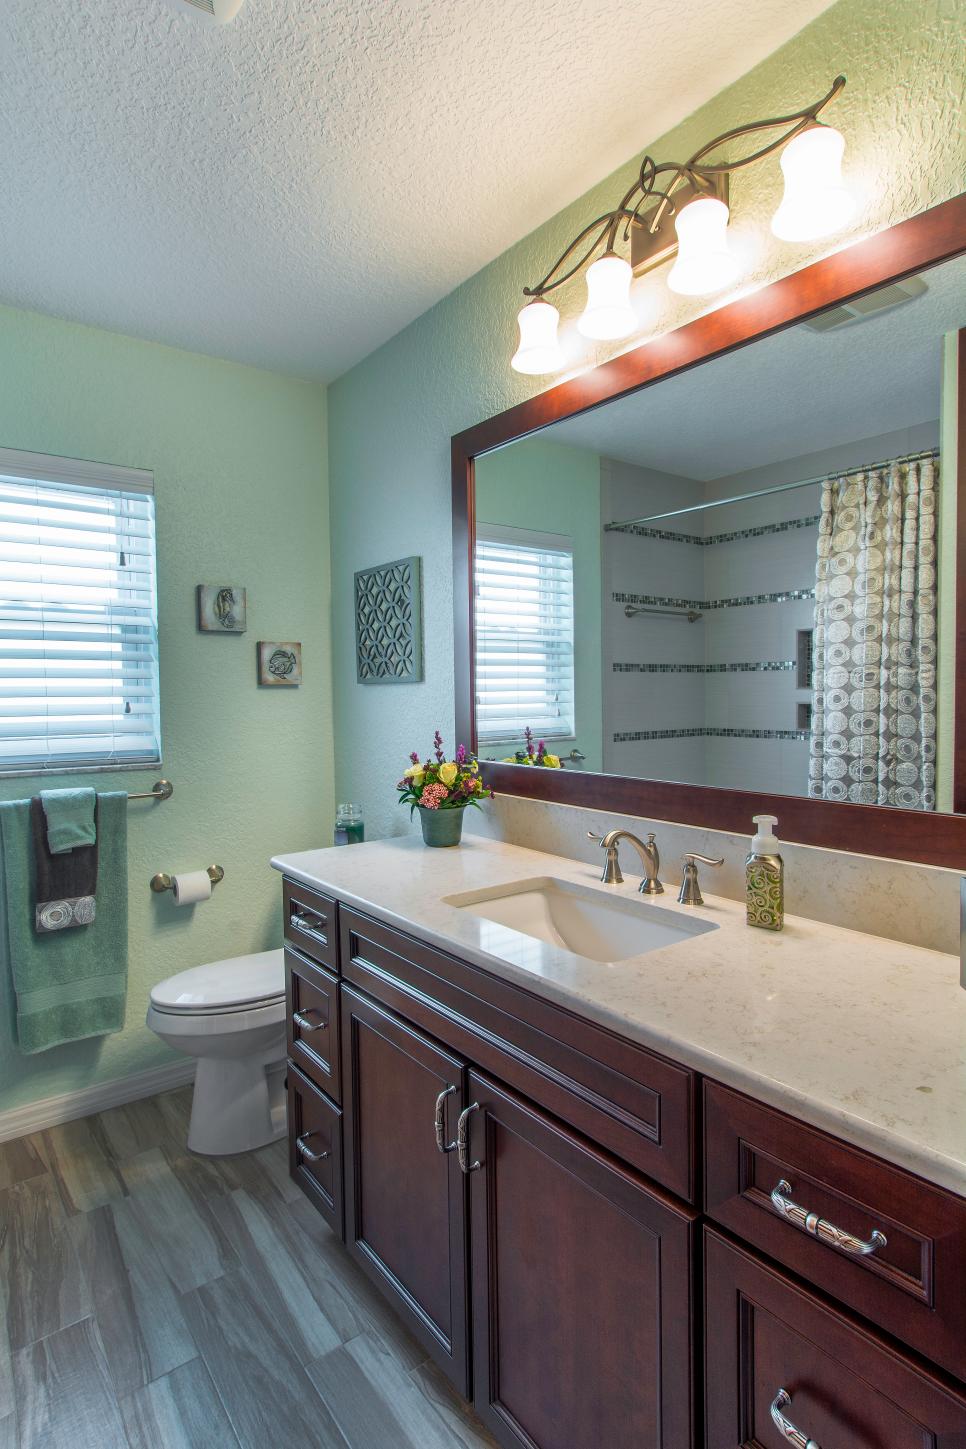 Green Transitional Style Bathroom With Wood Vanity And